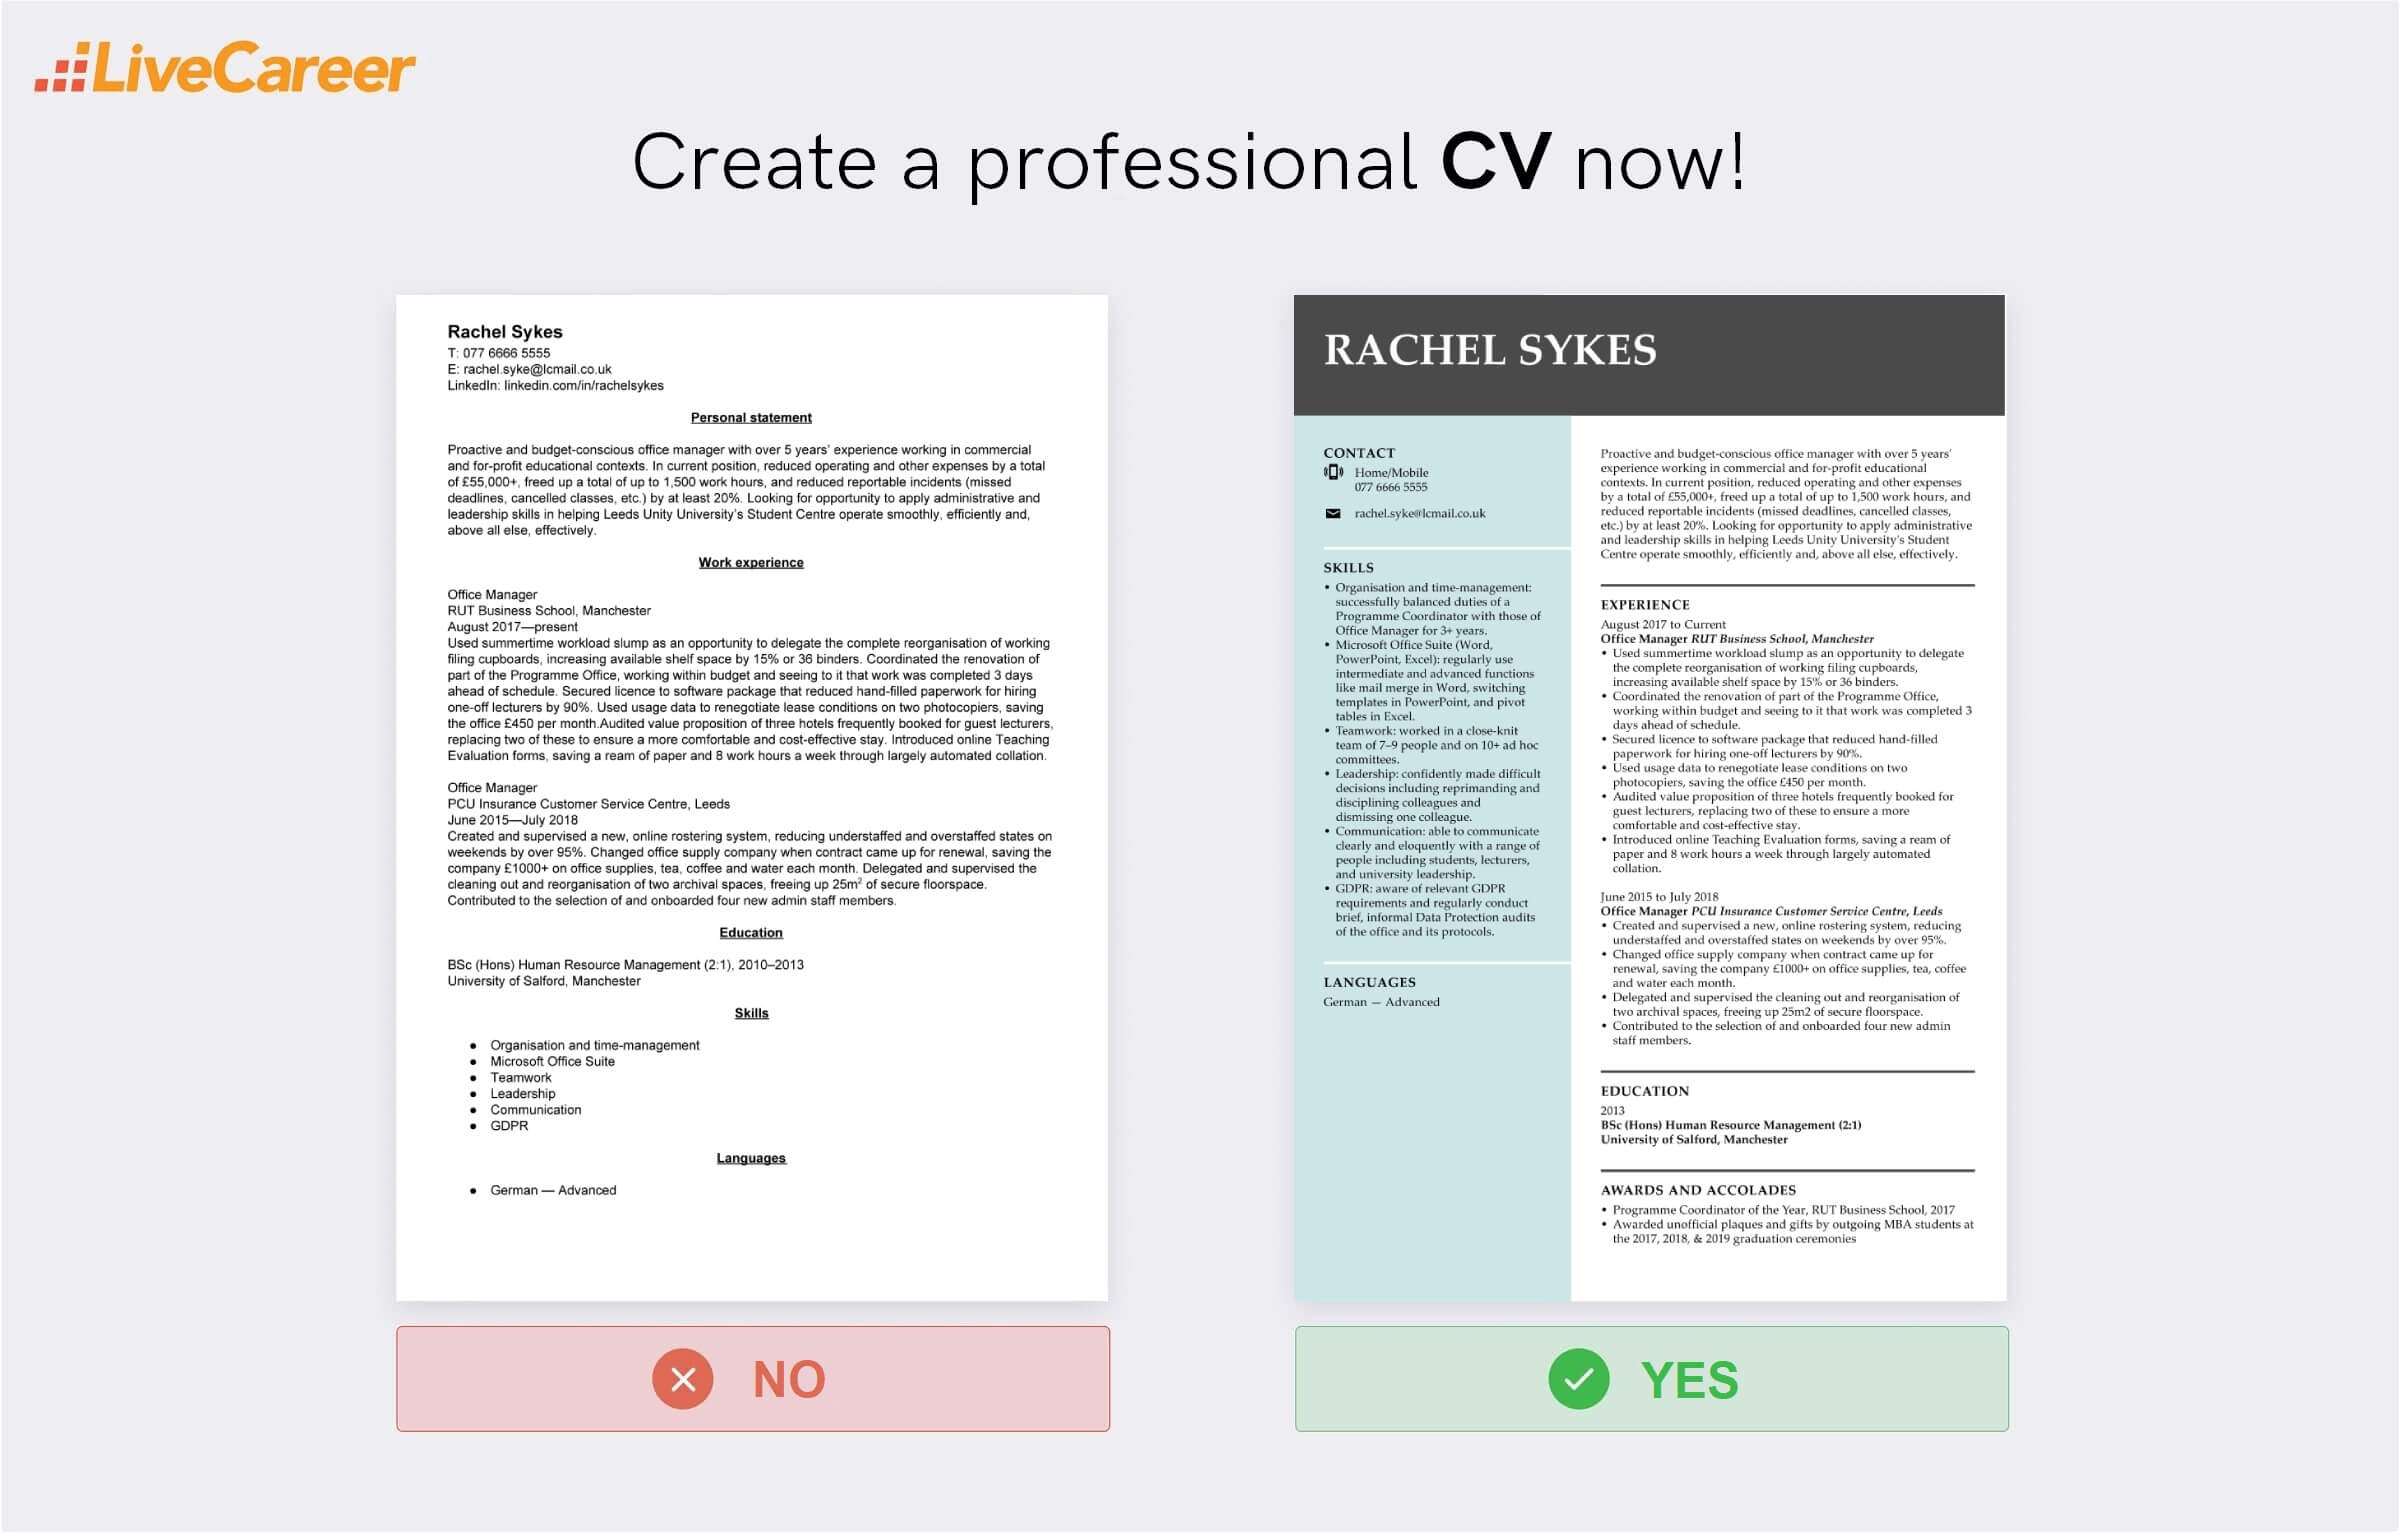 office manager cv example